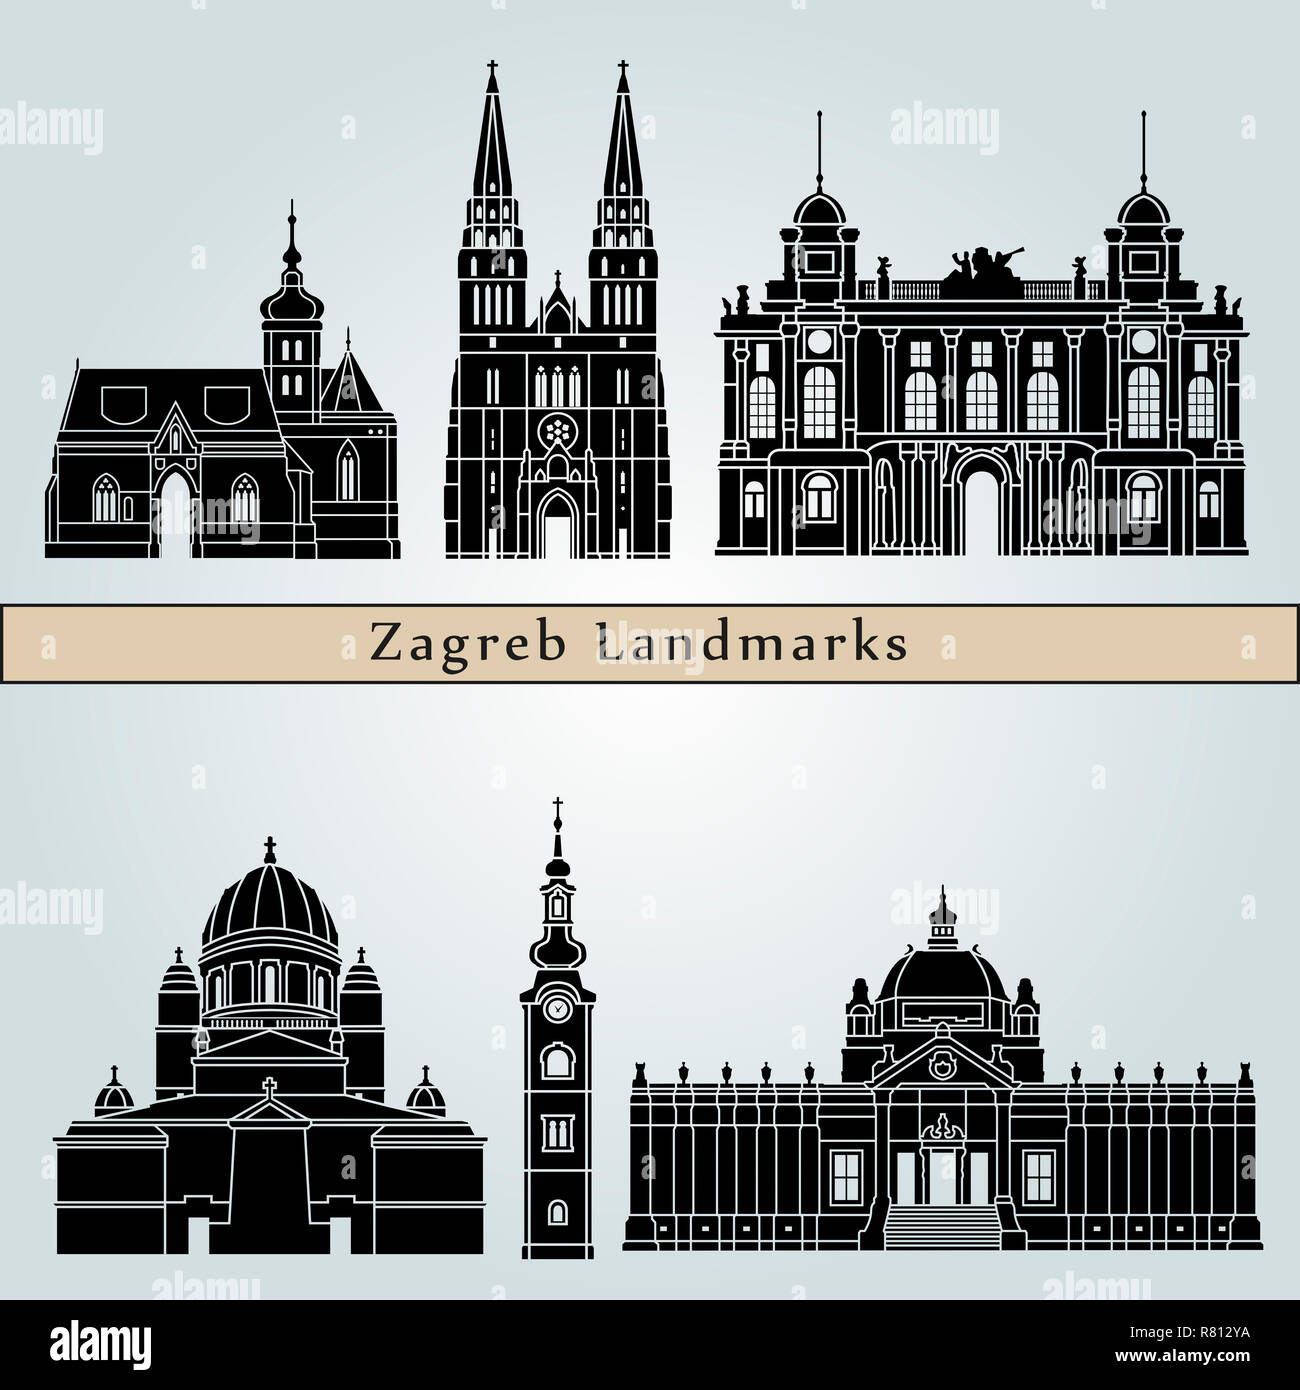 Zagreb landmarks and monuments isolated on blue background in editable vector file Stock Photo